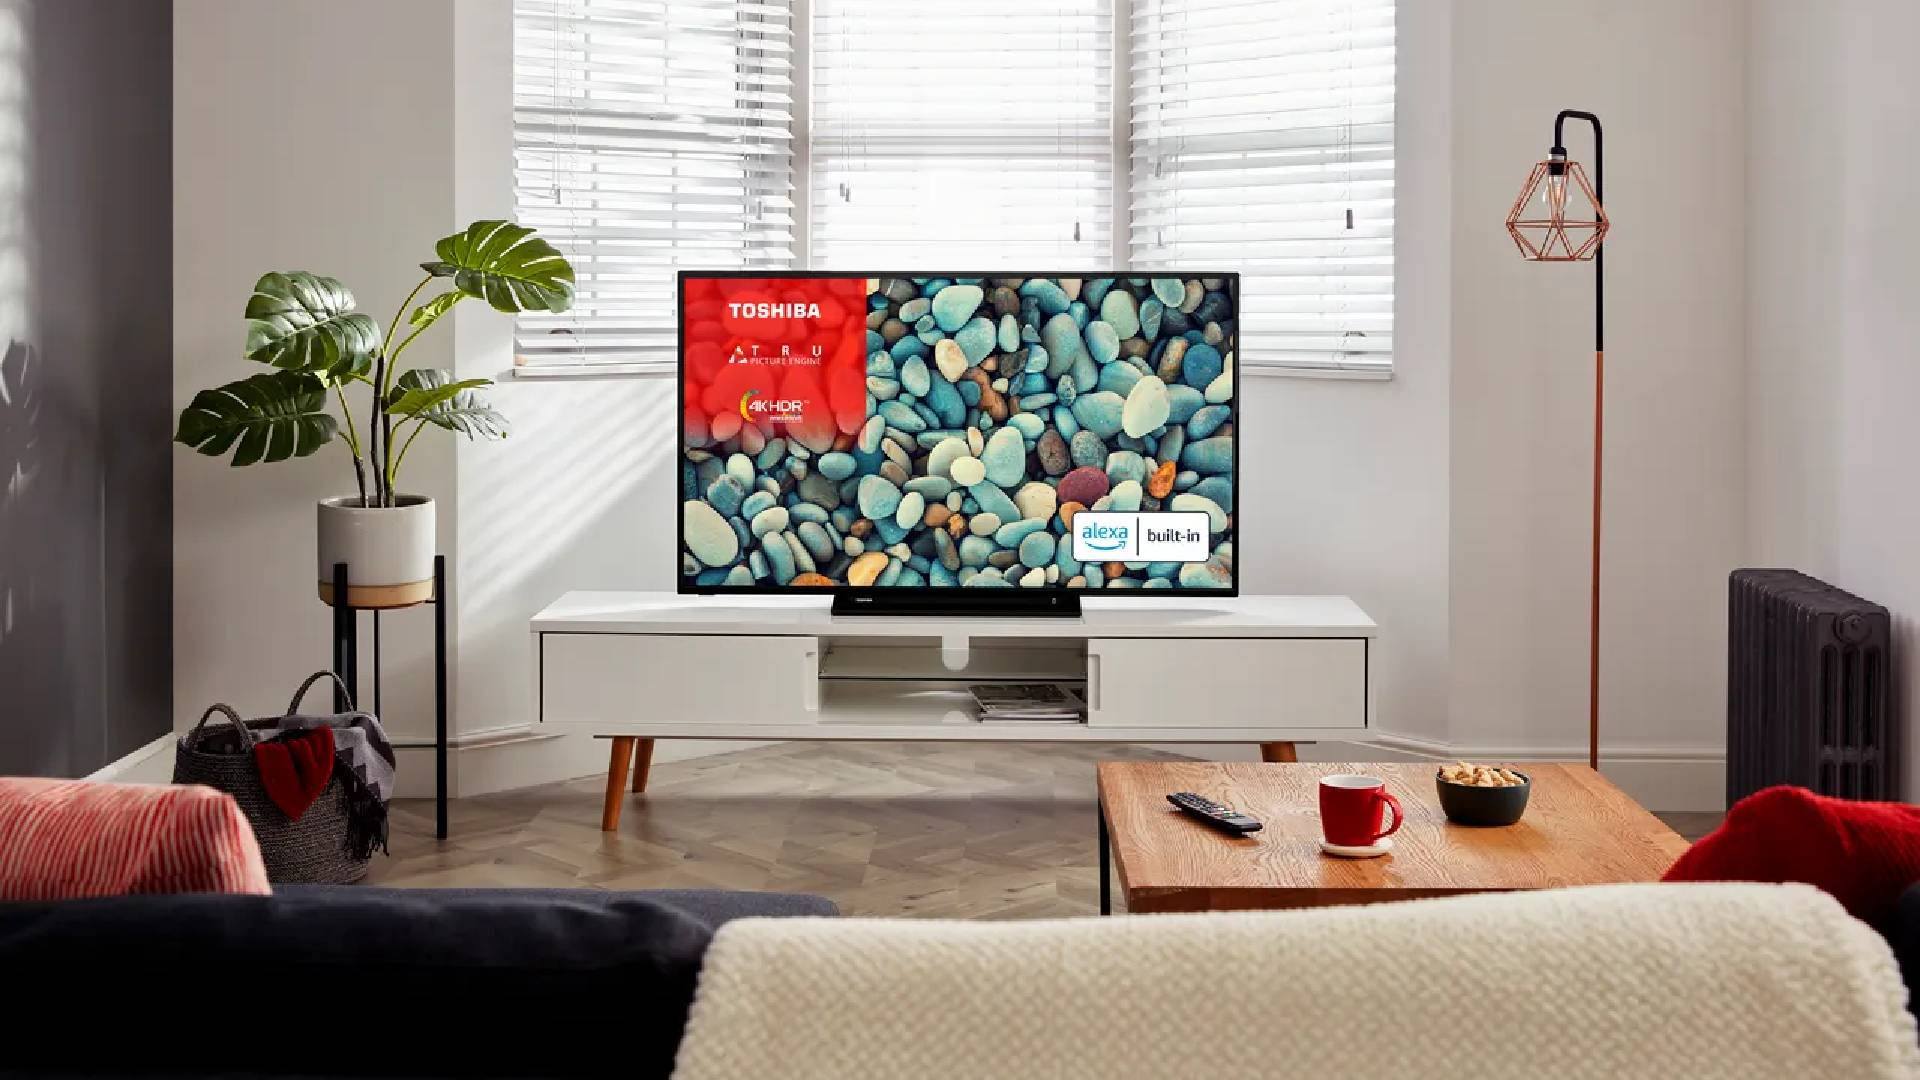 Toshiba UK31 TV on display in a living room surrounded by modern furniture